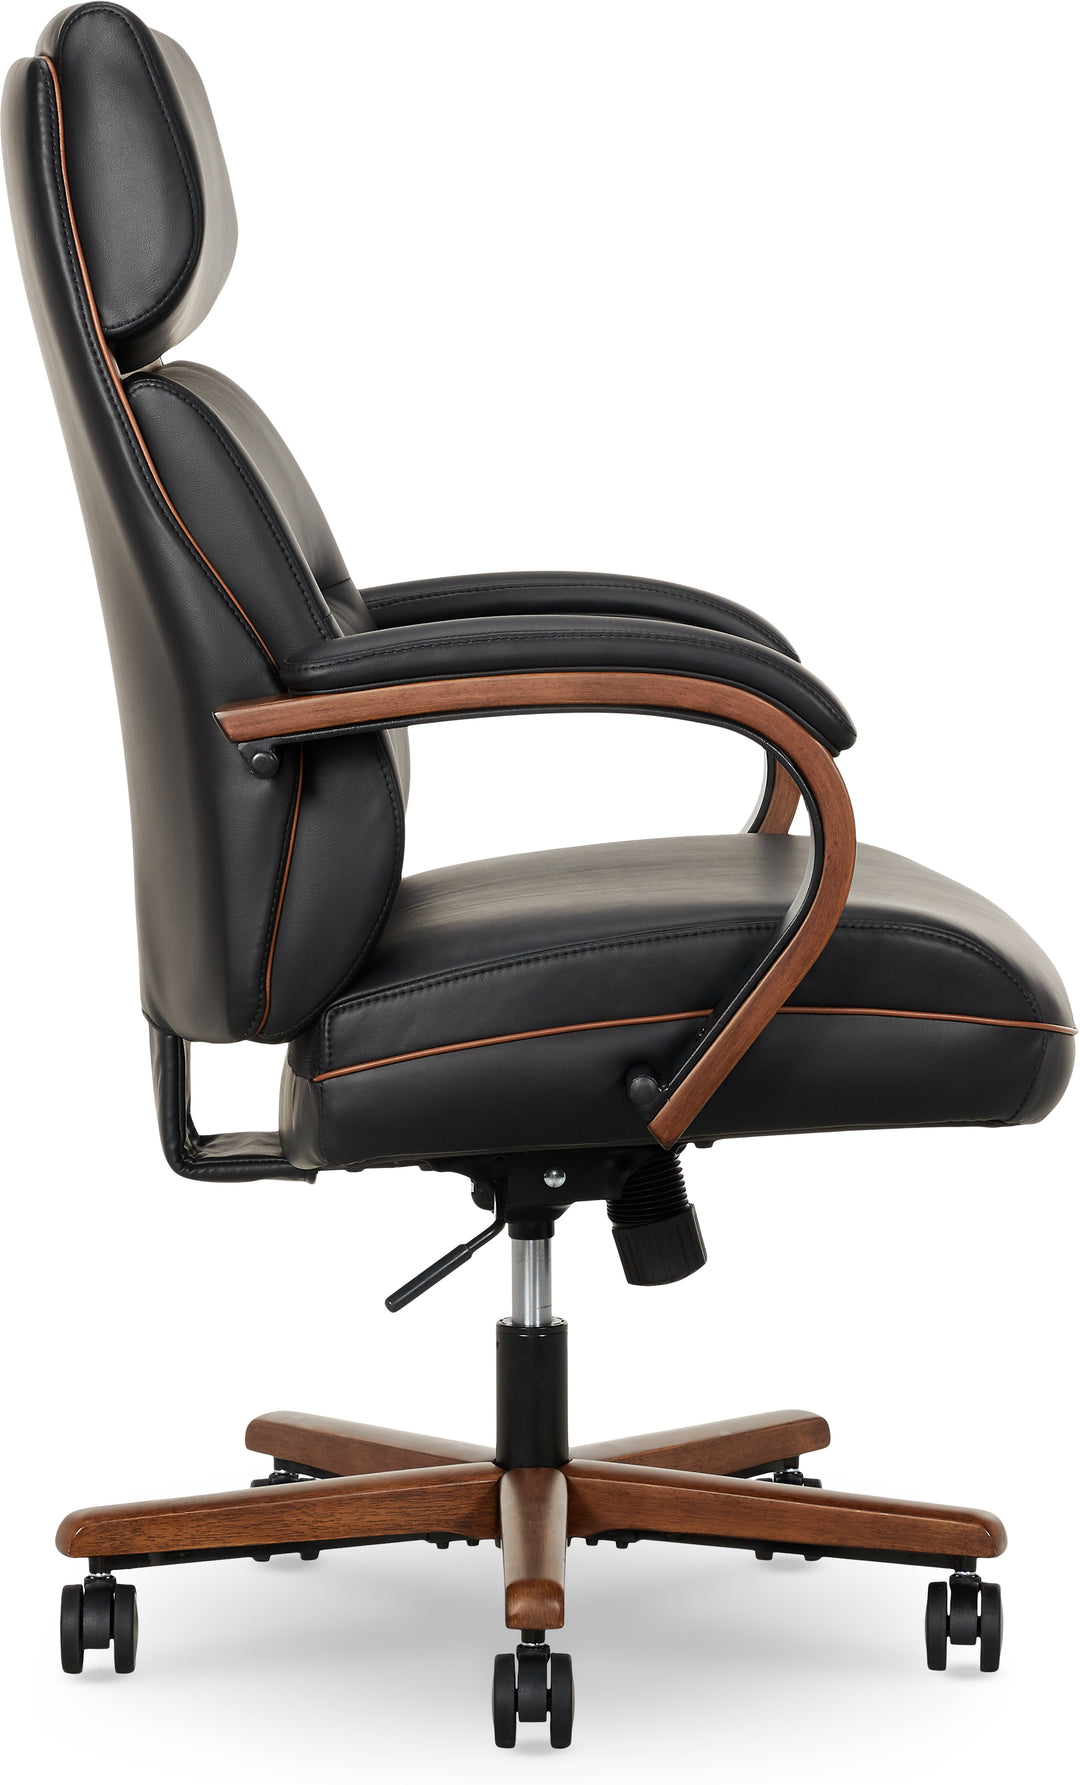 Finch Neo Two Retro-Modern Mid-Back Office Chair - Black_11